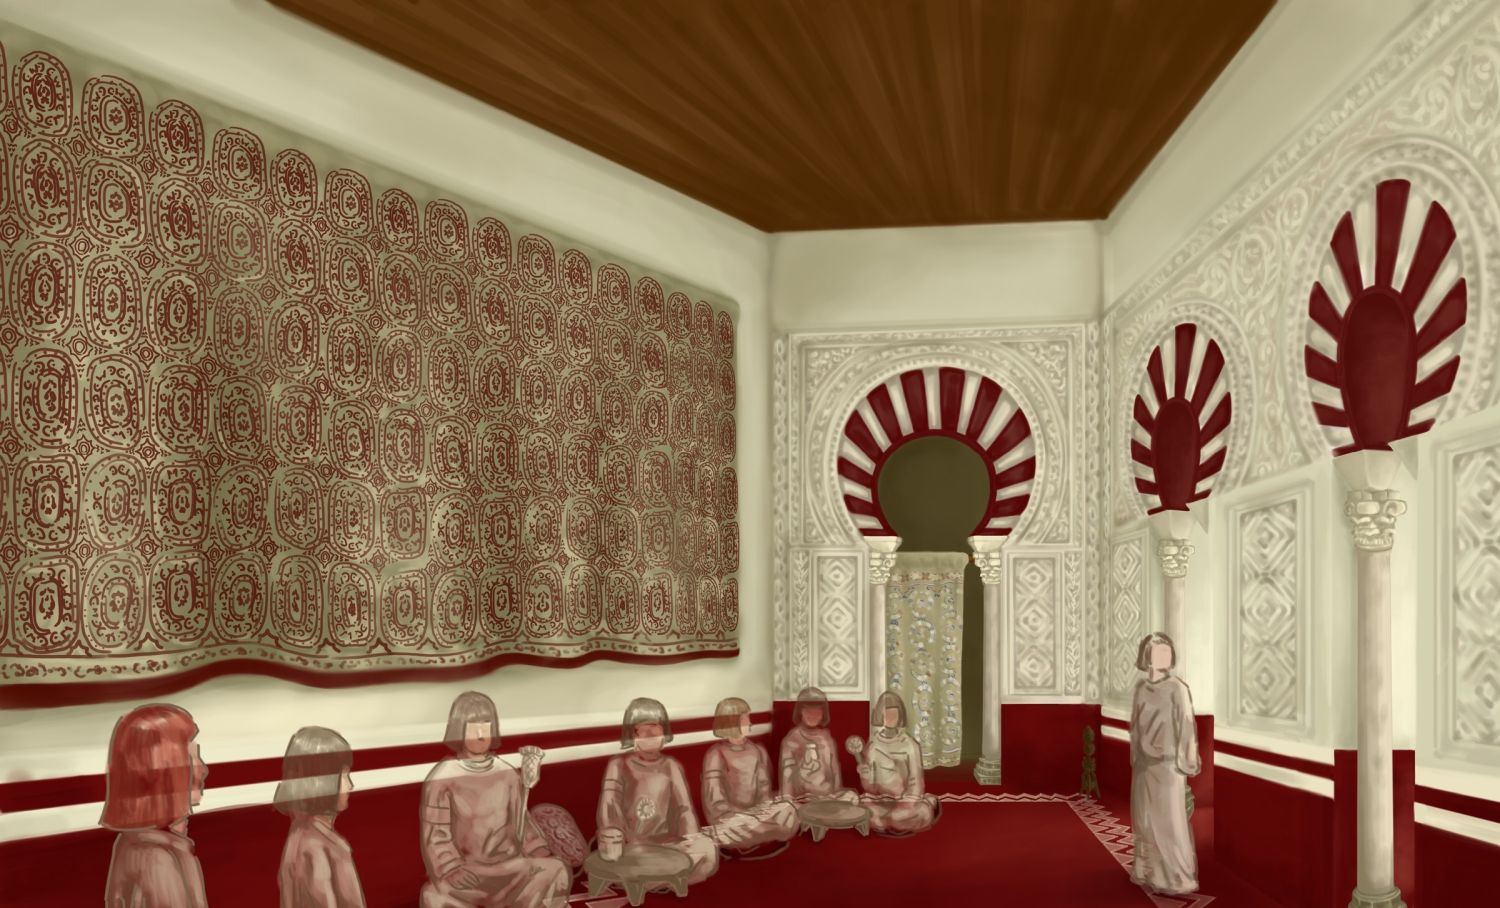 Double Hall (Central Block): imaginative visualization of majlis (gathering) within rear hall, showing textiles and architectural decoration.